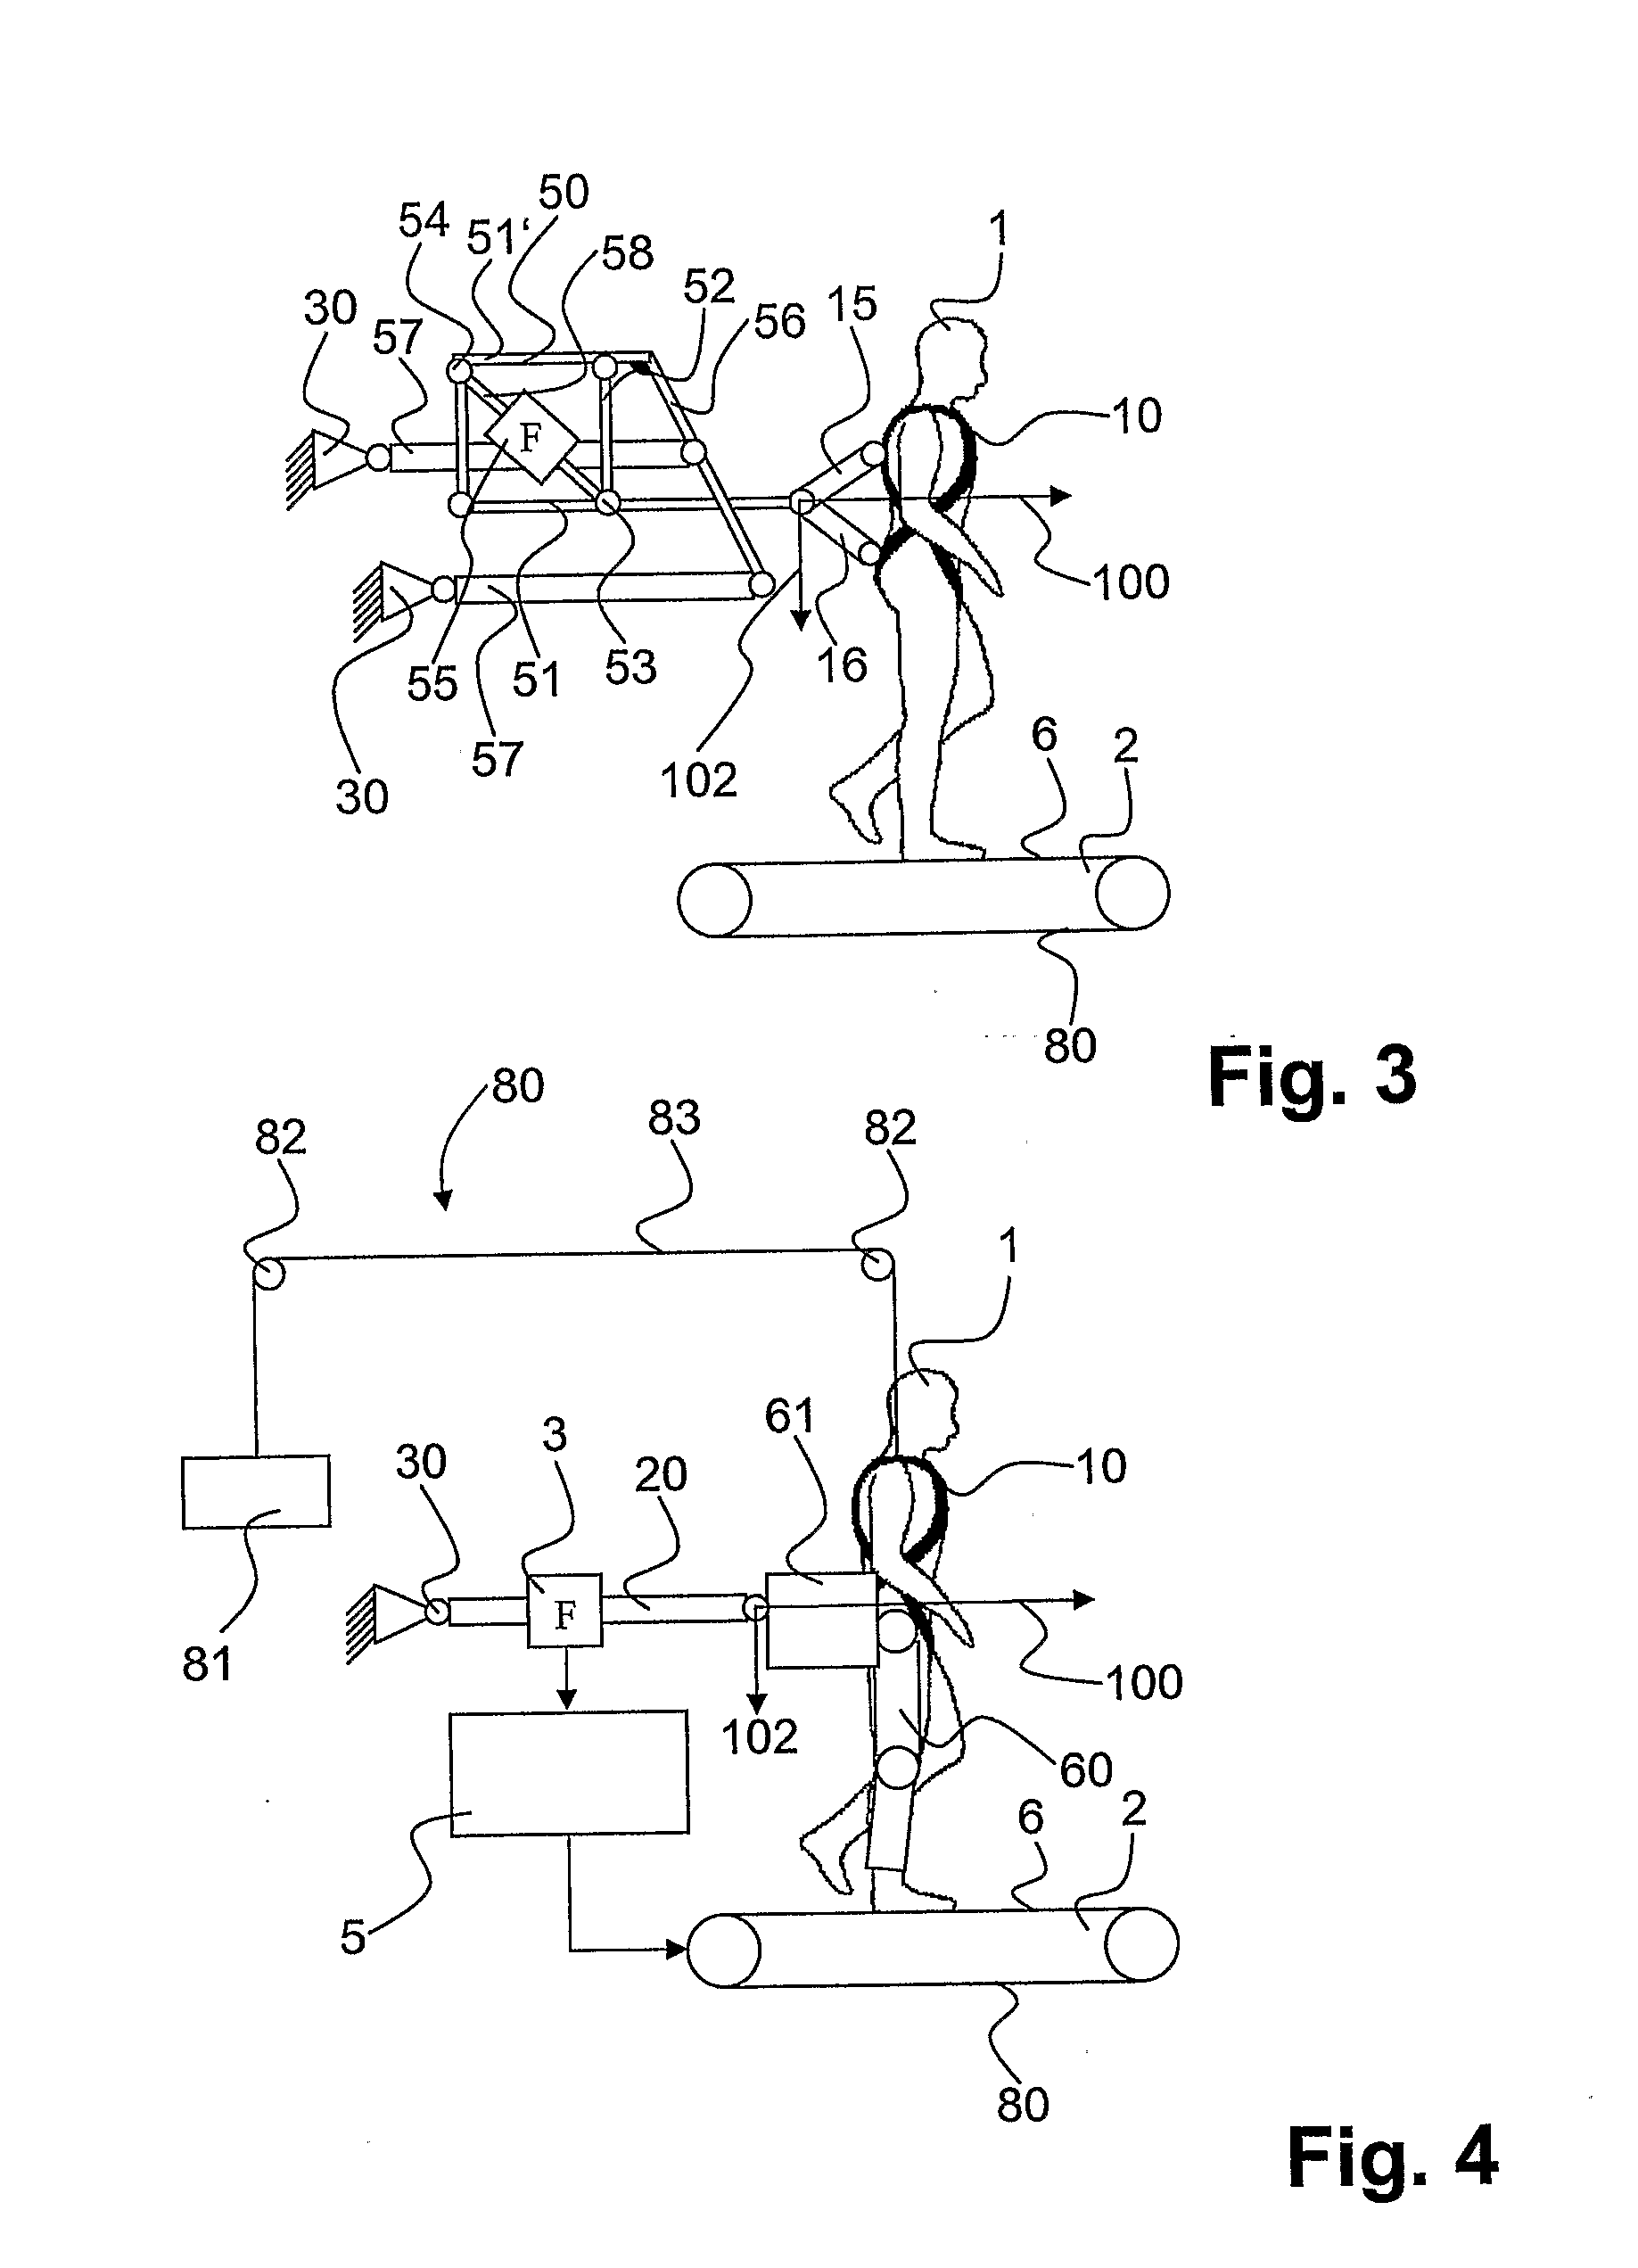 Device and Method for an Automatic Treadmill Therapy